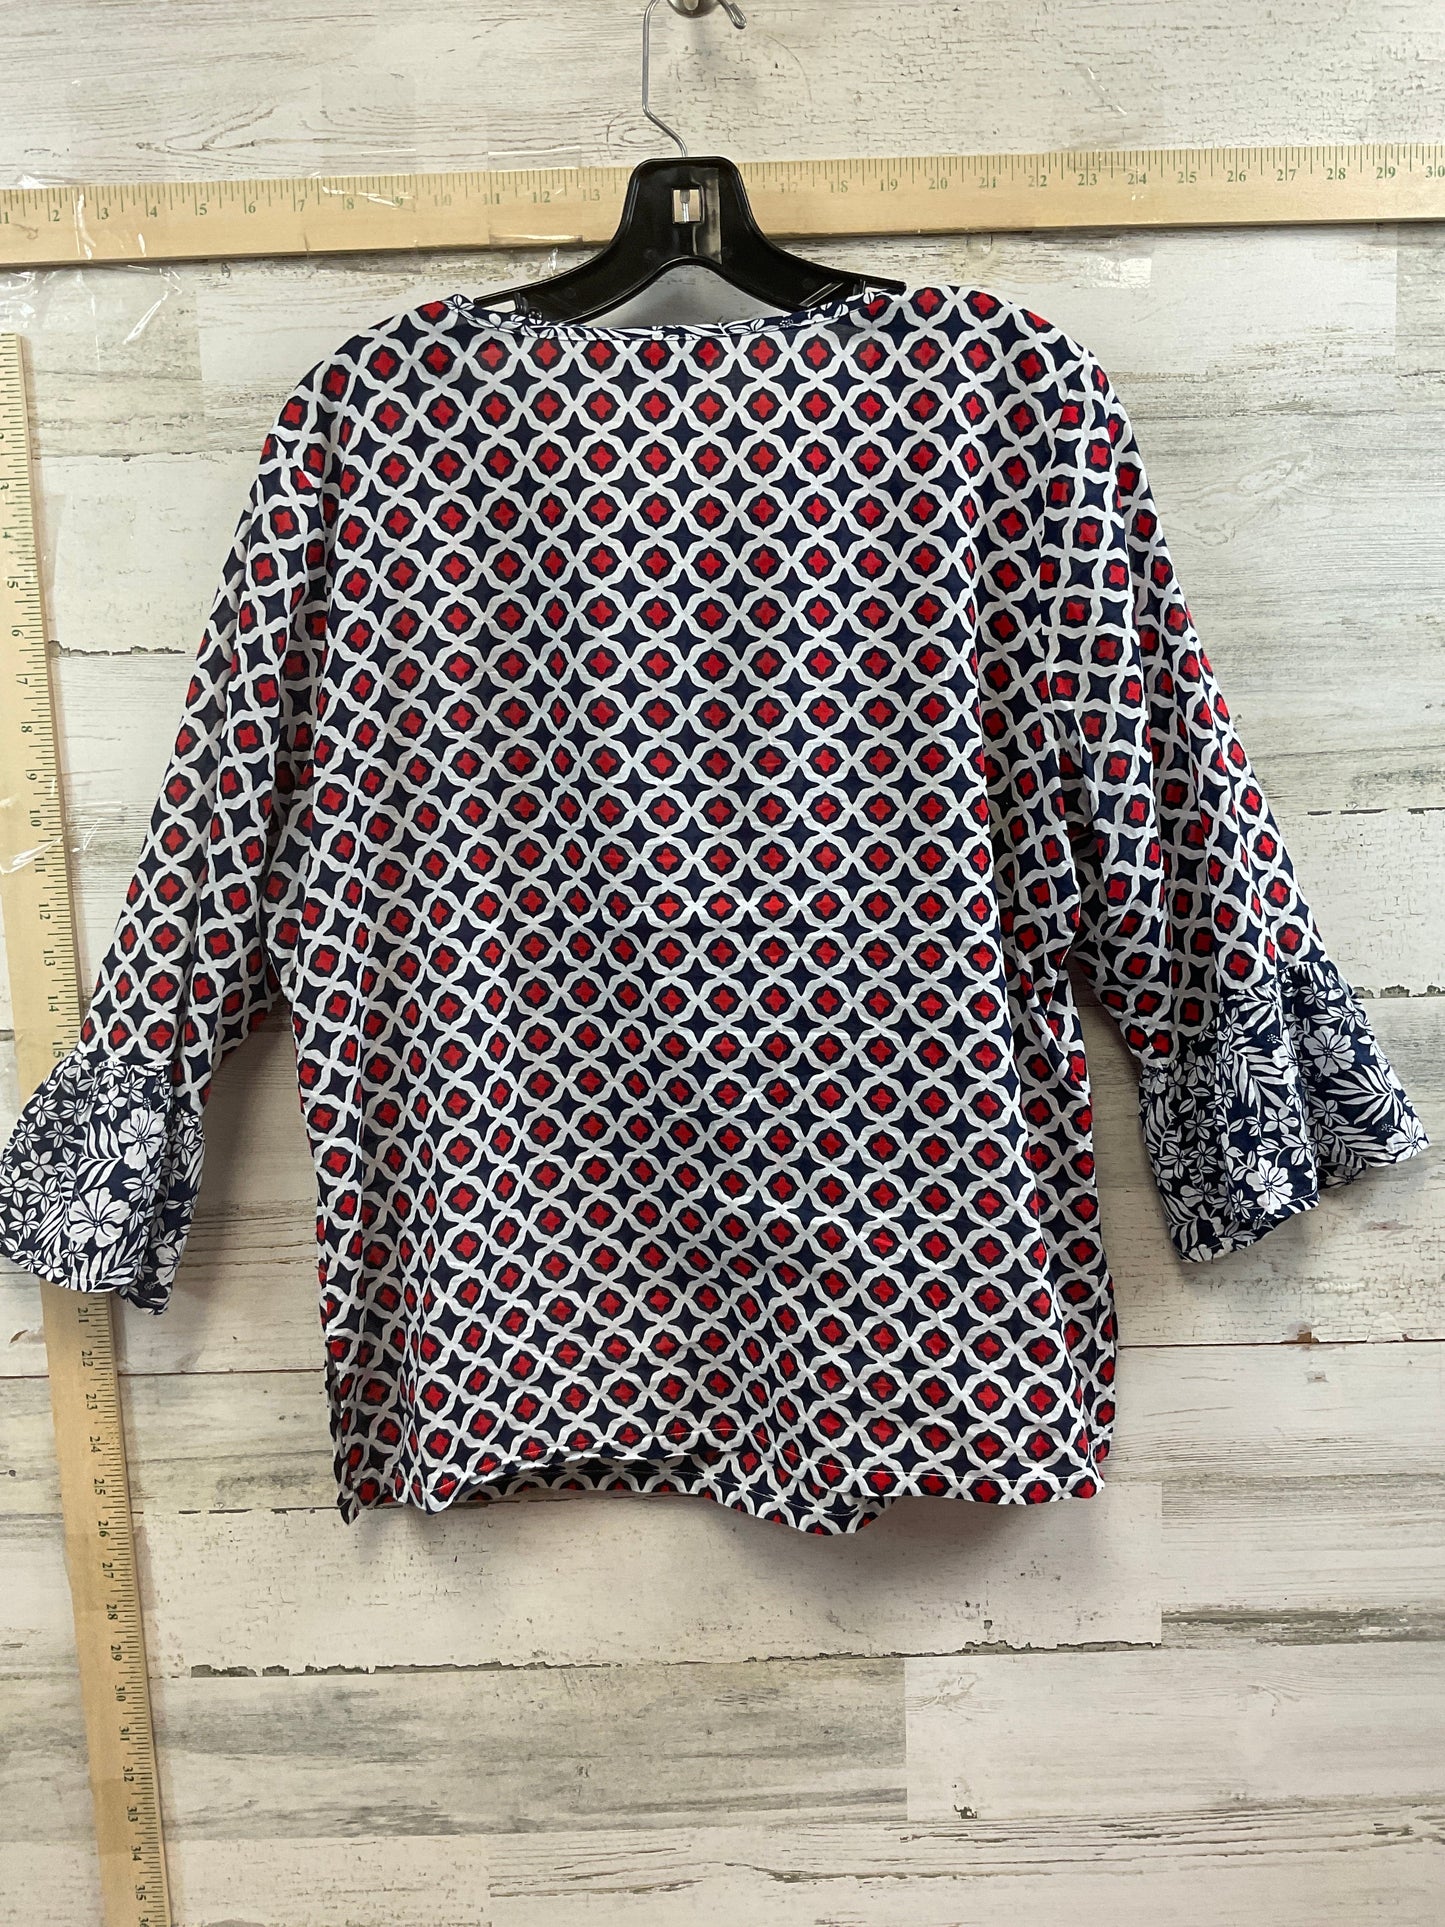 Blue & Red Top 3/4 Sleeve Tommy Bahama, Size S